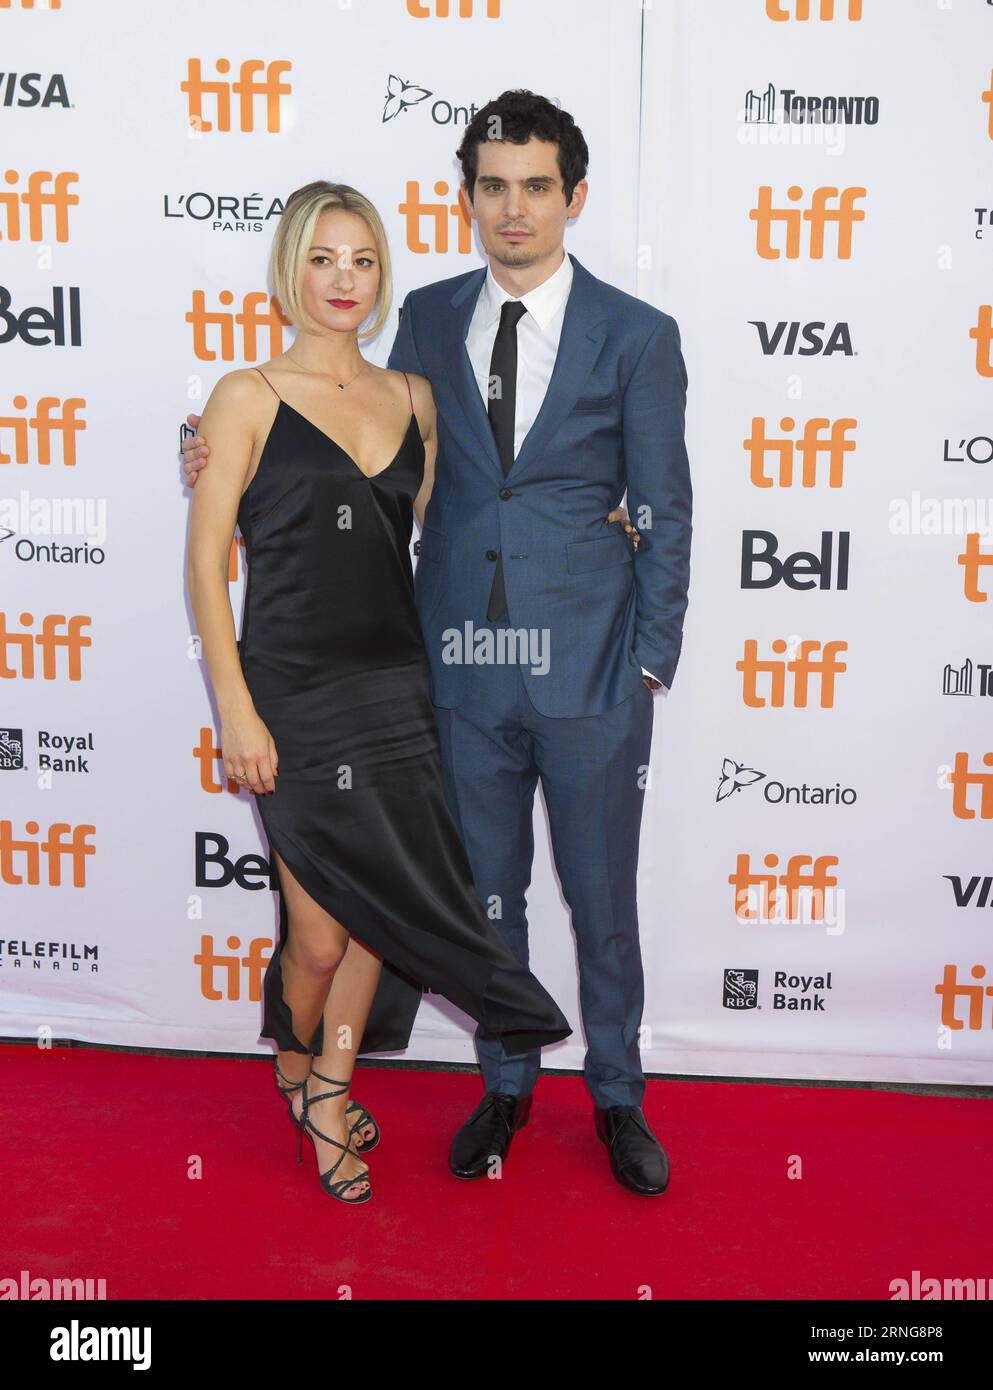 TORONTO, Sept. 12, 2016 -- Director Damien Chazelle (R) and actress Olivia Hamilton pose for photos before the Canadian premiere of the film La La Land at the Princess of Wales Theater during the 41st Toronto International Film Festival in Toronto, Canada, Sept. 12, 2016. ) (zjy) CANADA-TORONTO-FILM FESTIVAL- LA LA LAND ZouxZheng PUBLICATIONxNOTxINxCHN   Toronto Sept 12 2016 Director Damien Chazelle r and actress Olivia Hamilton Pose for Photos Before The Canadian Premiere of The Film La La Country AT The Princess of Wales Theatre during The 41st Toronto International Film Festival in Toronto Stock Photo